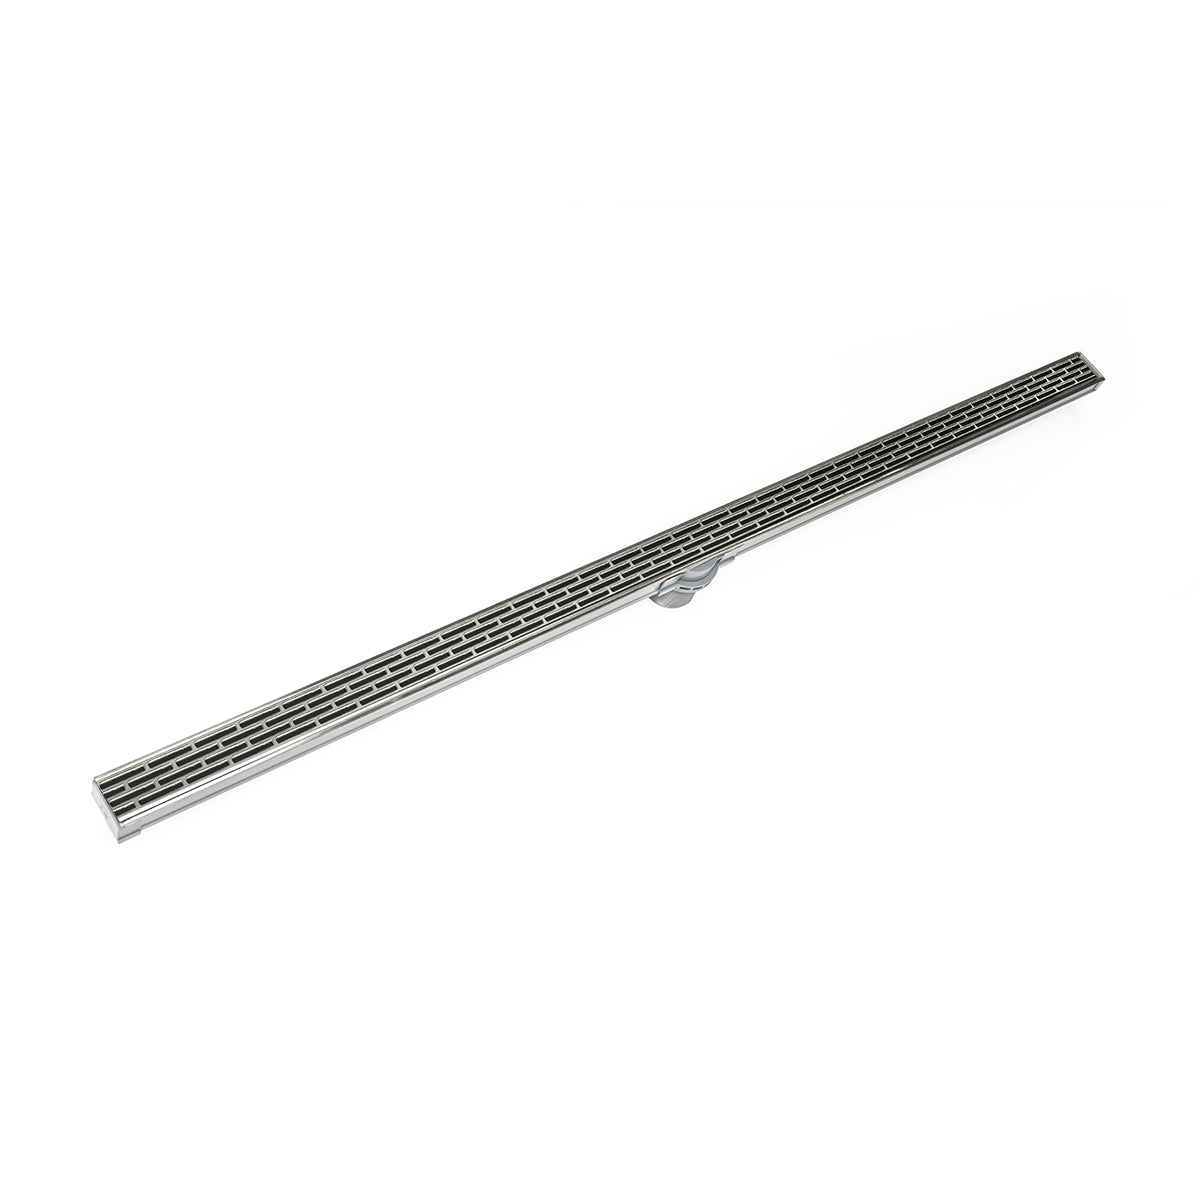 Infinity Drain 60" S-PVC Series Low Profile Site Sizable Linear Drain Kit with 1 1/2" Perforated Offset Slot Grate